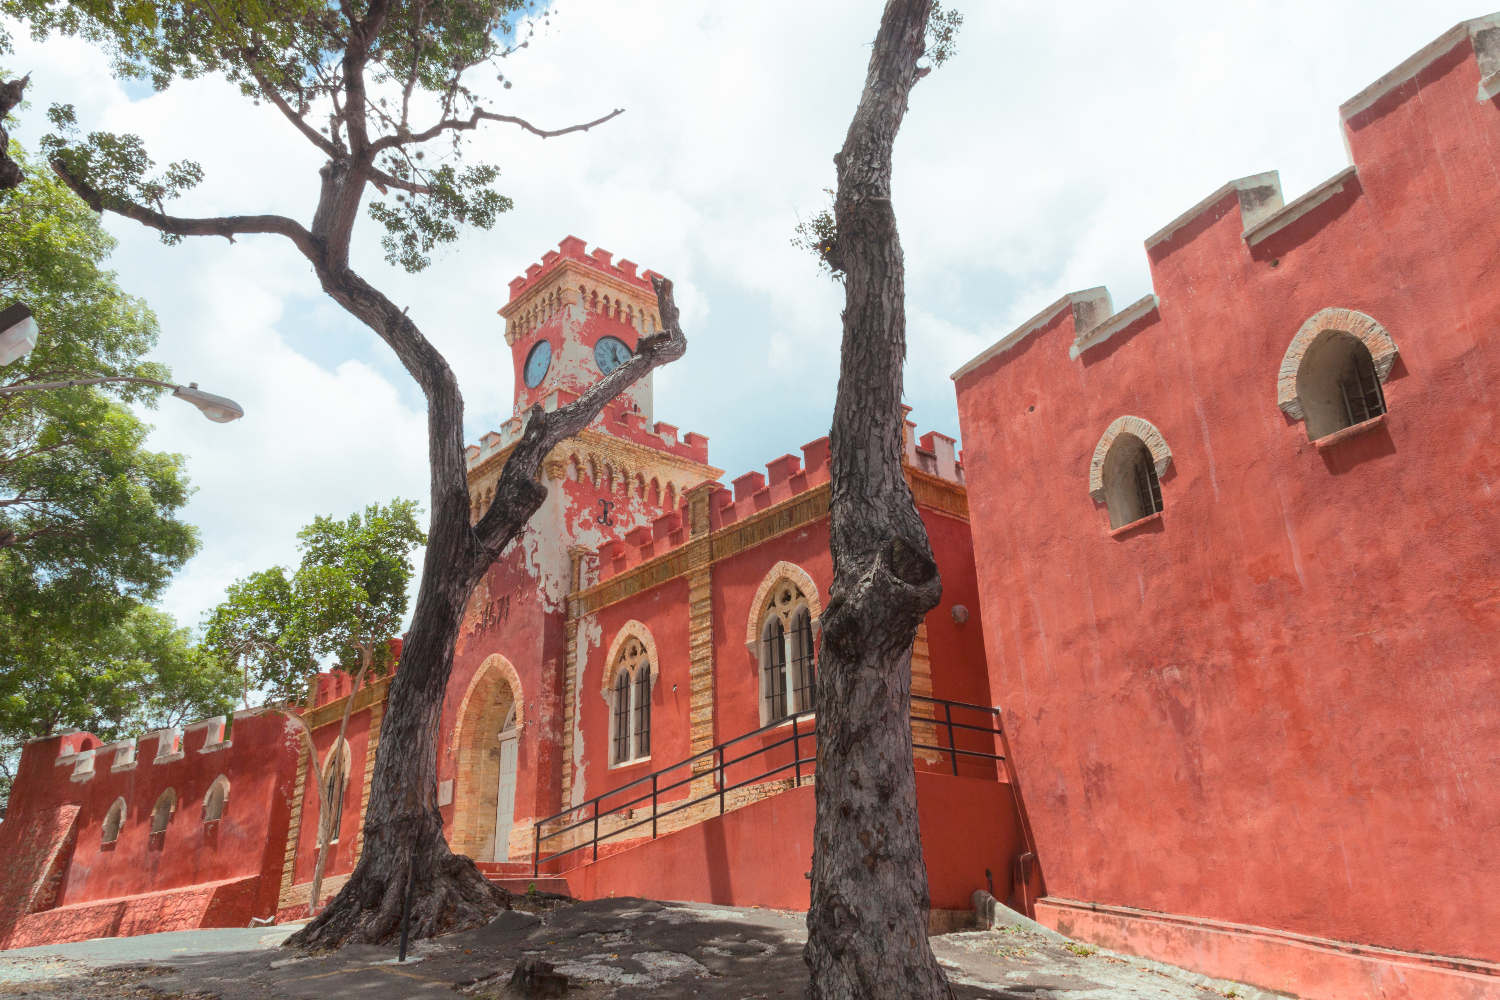 Fiery Fort Christian in Charlotte Amalie, St Thomas. Image by Diane Macdonald / Photographer's Choice / Getty